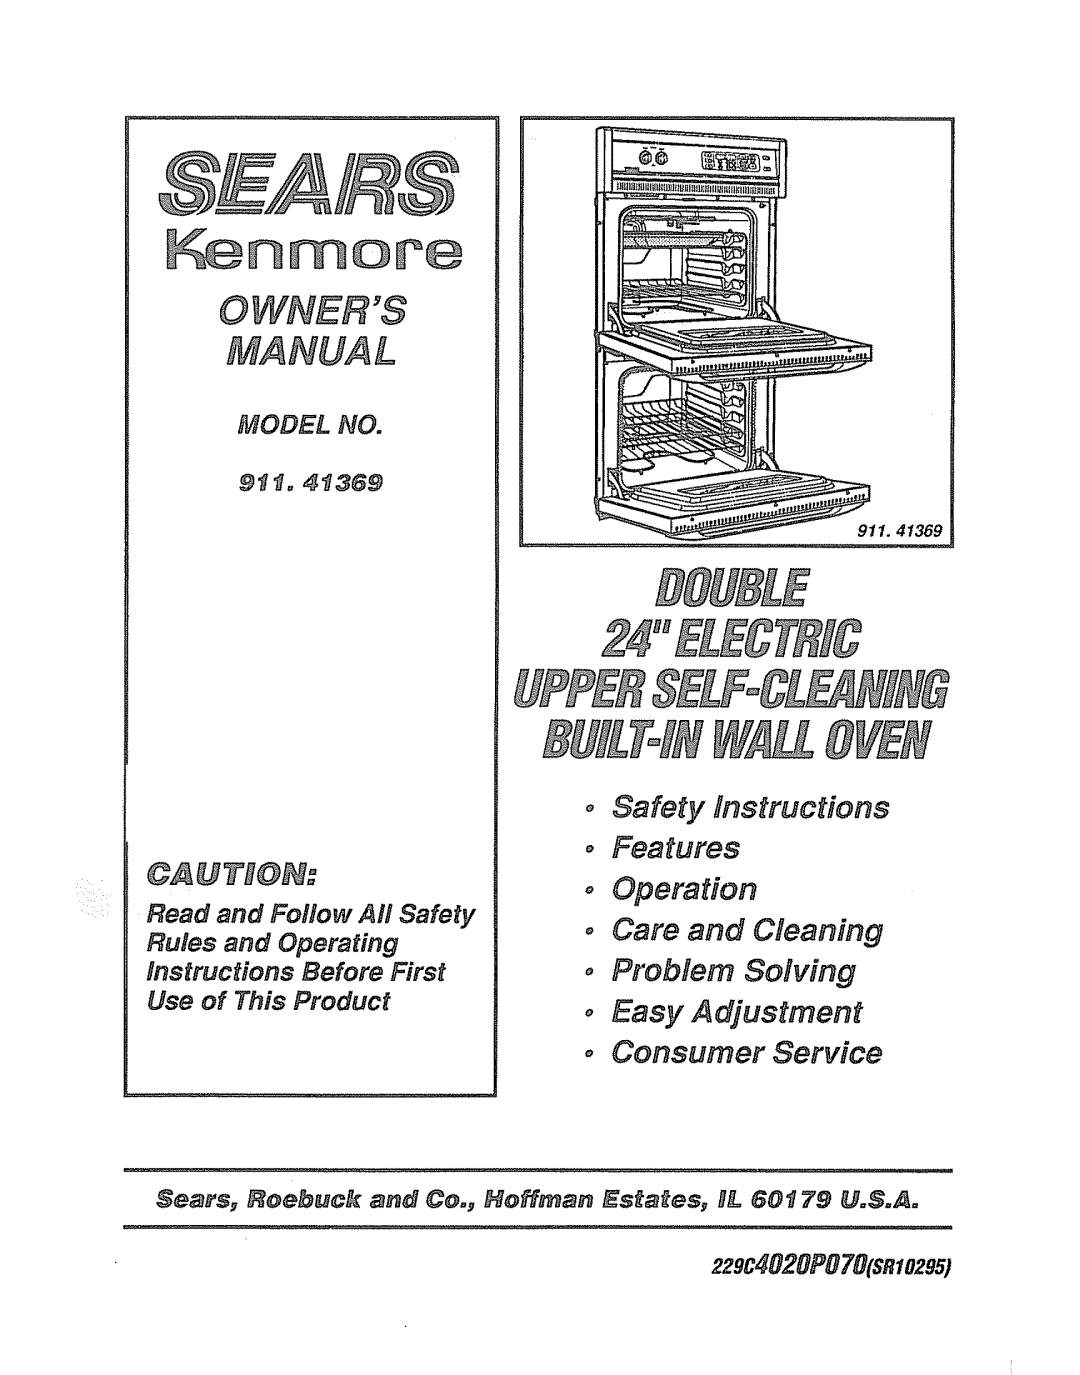 Sears 911.41369 manual •Safety Instructions Features, o Care and Cleaning, Manual, oOperation, o Consumer Service, 9ti 